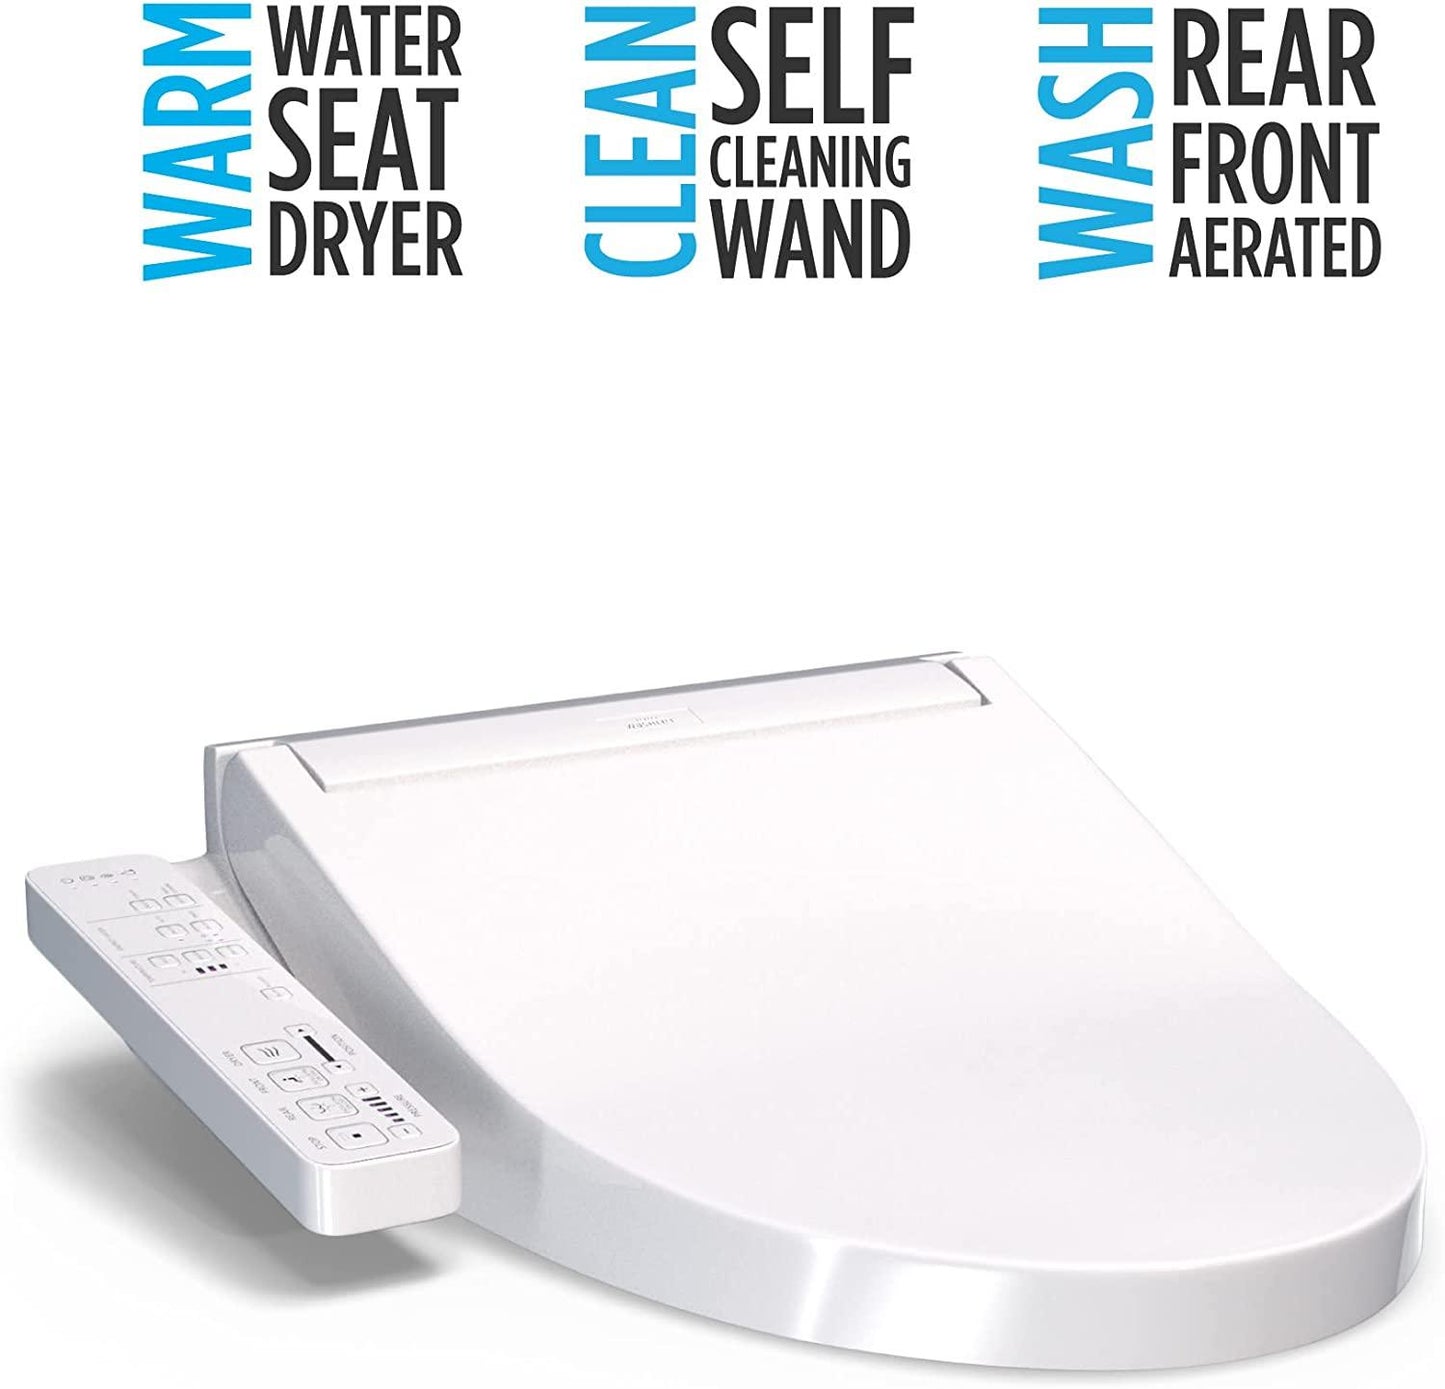 TOTO WASHLET KC2,Electronic Bidet Toilet Seat with Heated Seat and SoftClose Lid, Cotton White - YOURISHOP.COM